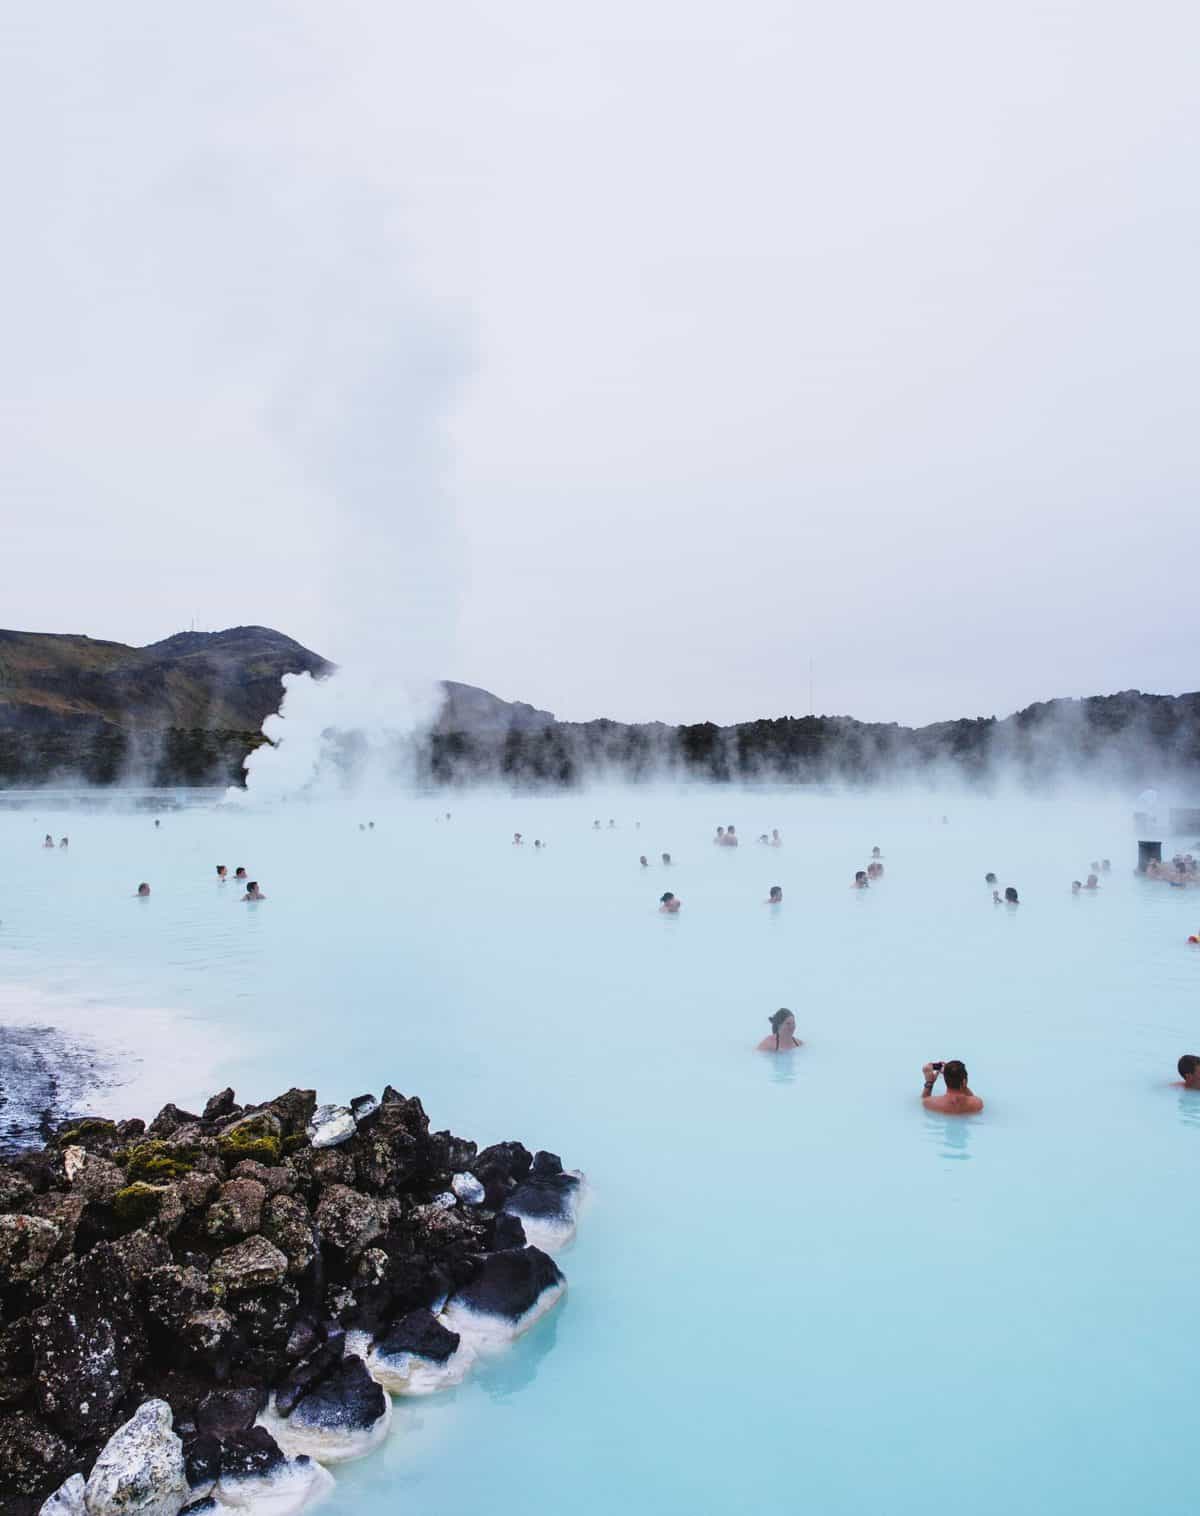 In Iceland, hot water and steam were long used for bathing. 